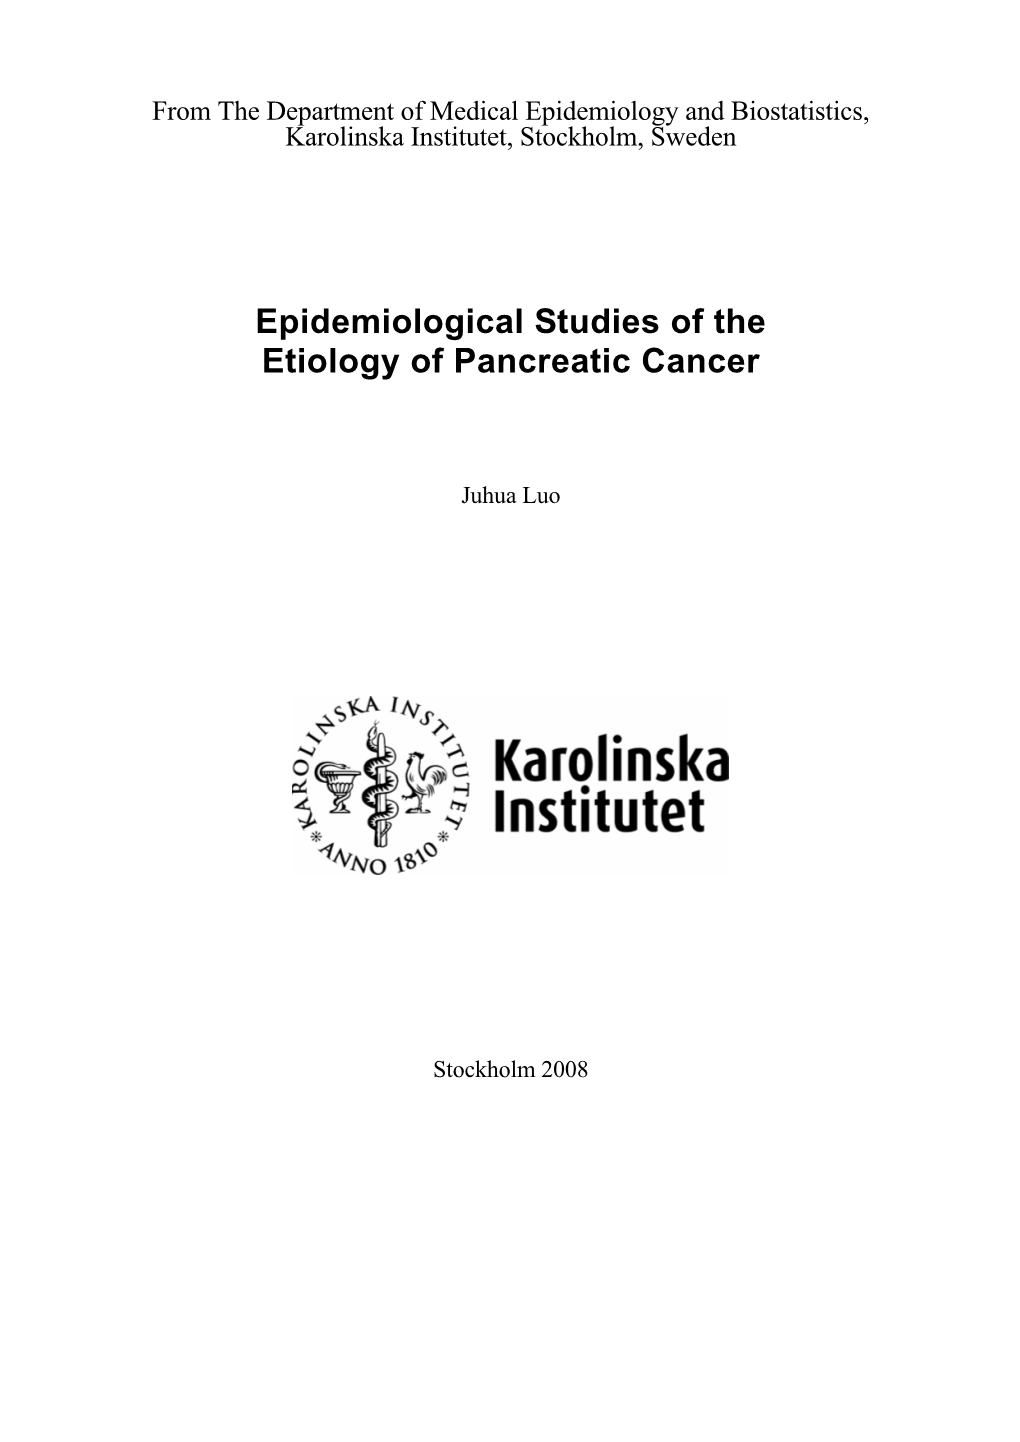 Epidemiological Studies of the Etiology of Pancreatic Cancer